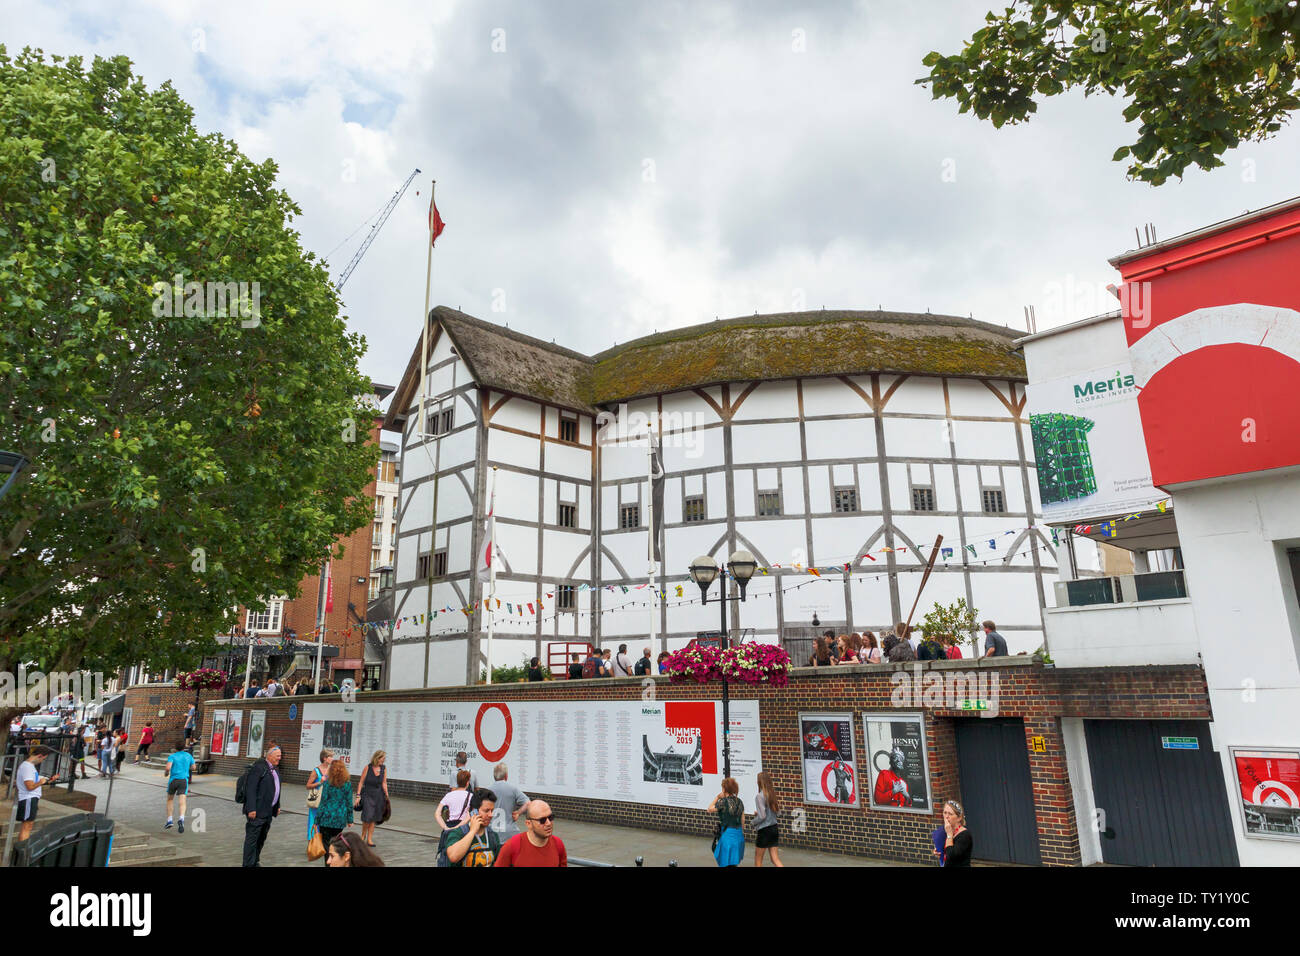 The popular restored Shakespeare's Globe Theatre on the South Bank of the River Thames Embankment, Southwark, London SE1 and tourists Stock Photo